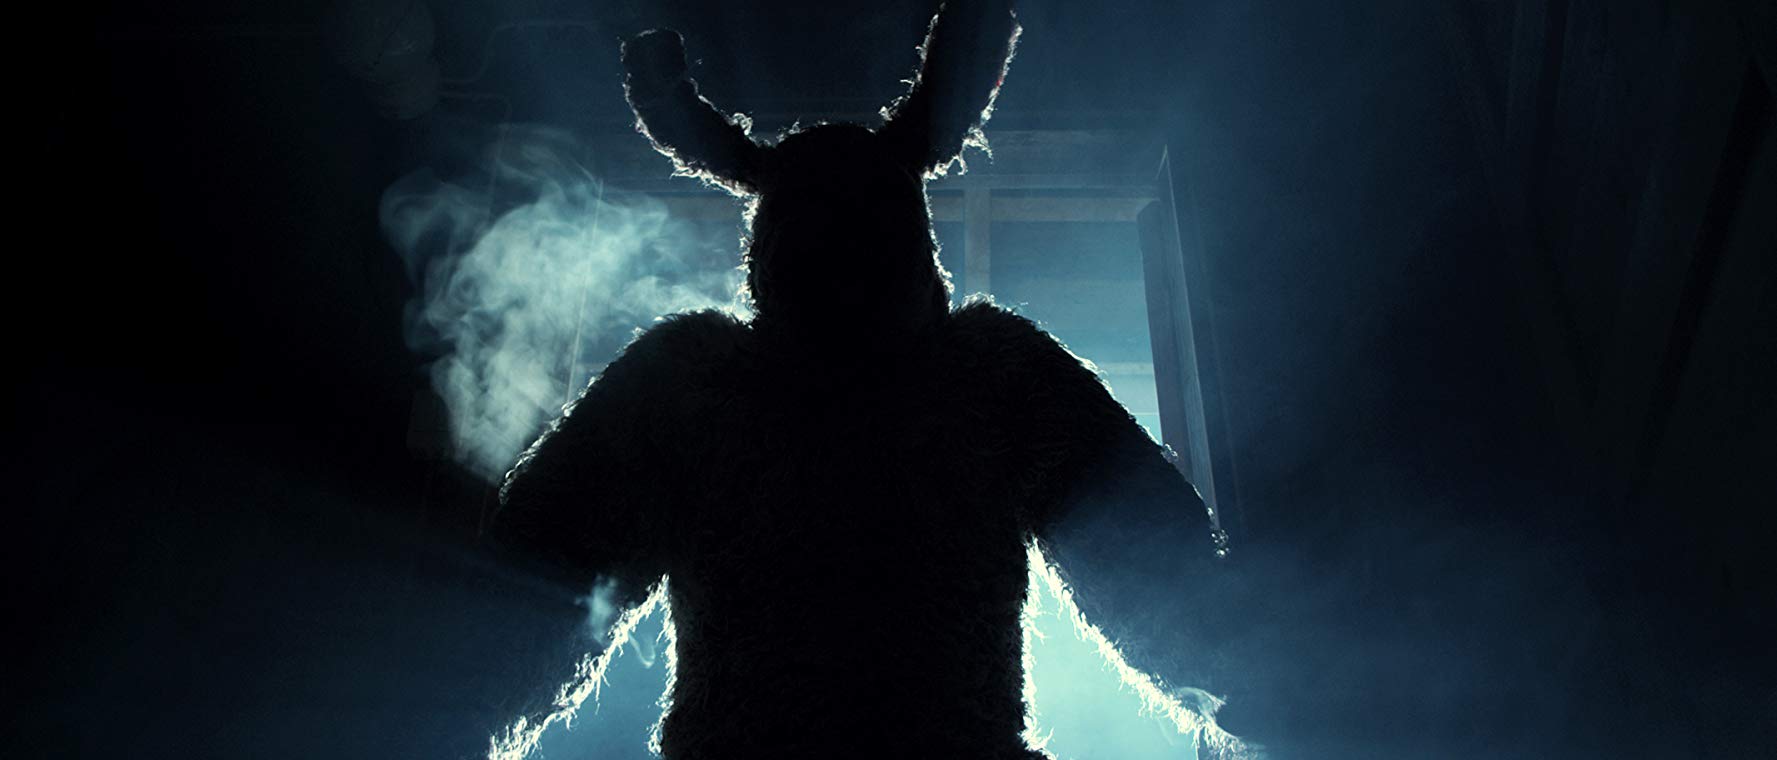 The giant killer bunny in Bunny the Killer Thing (2015)